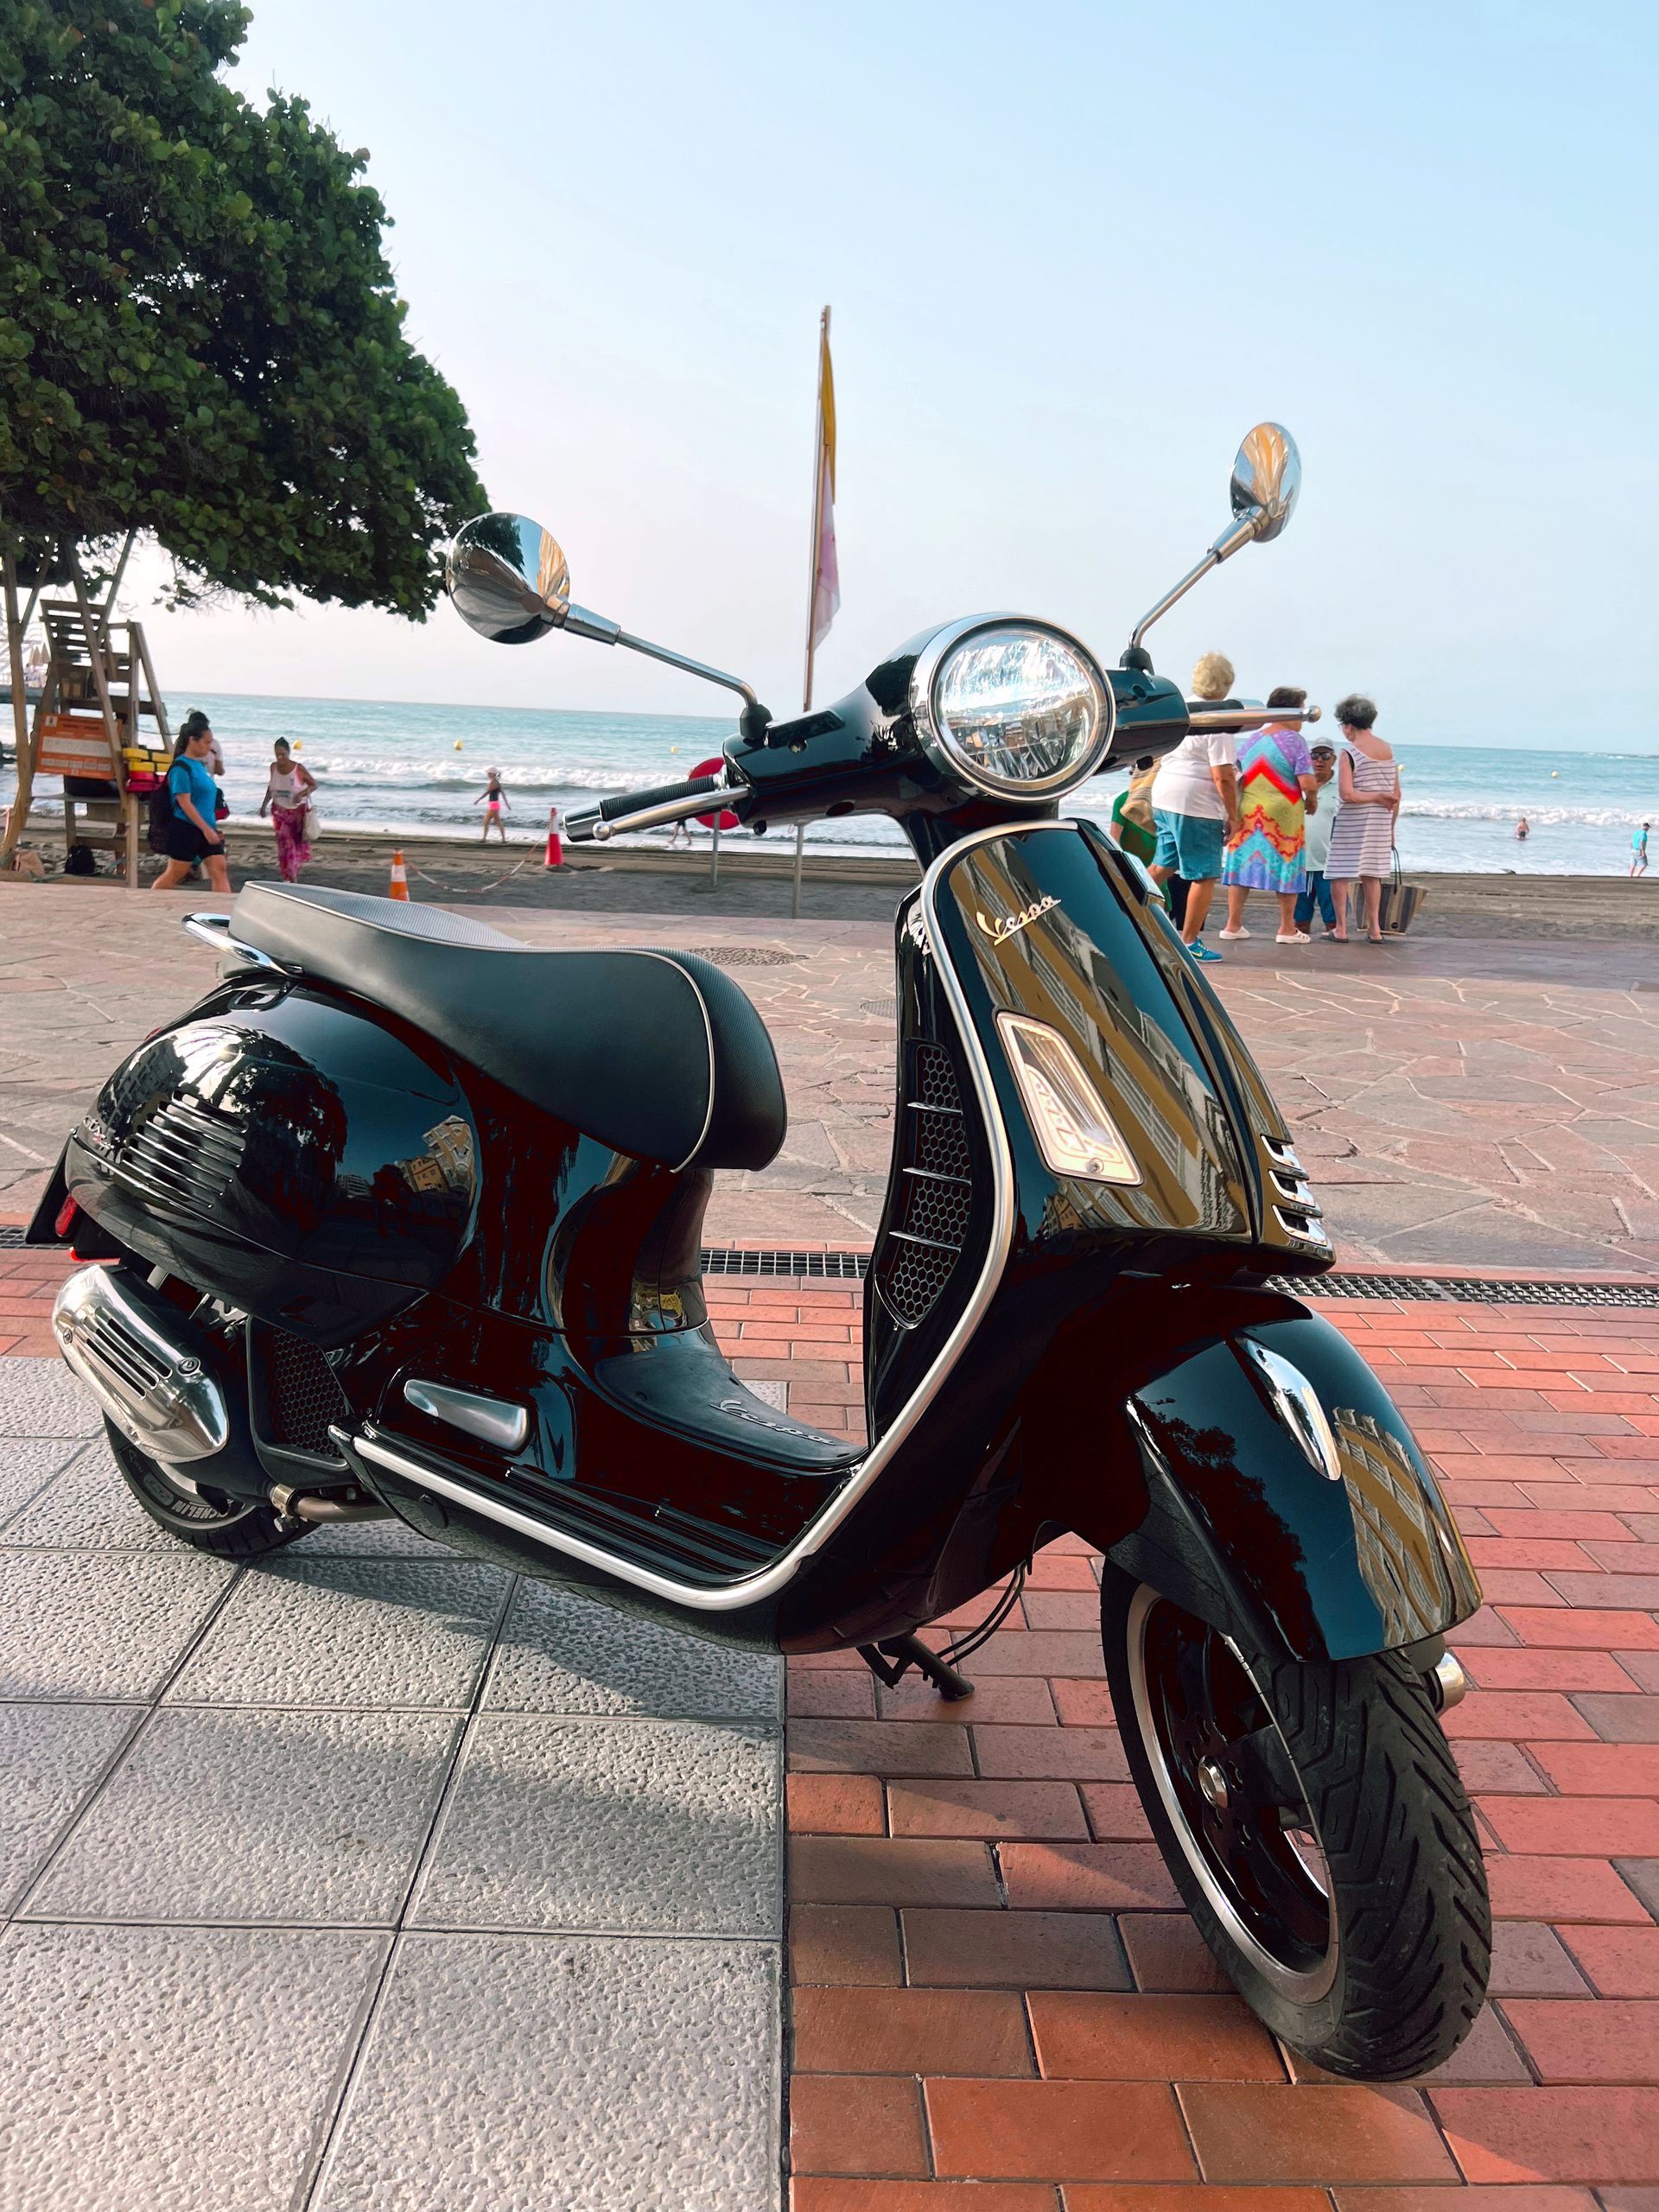 A black scooter is parked in front of a beach